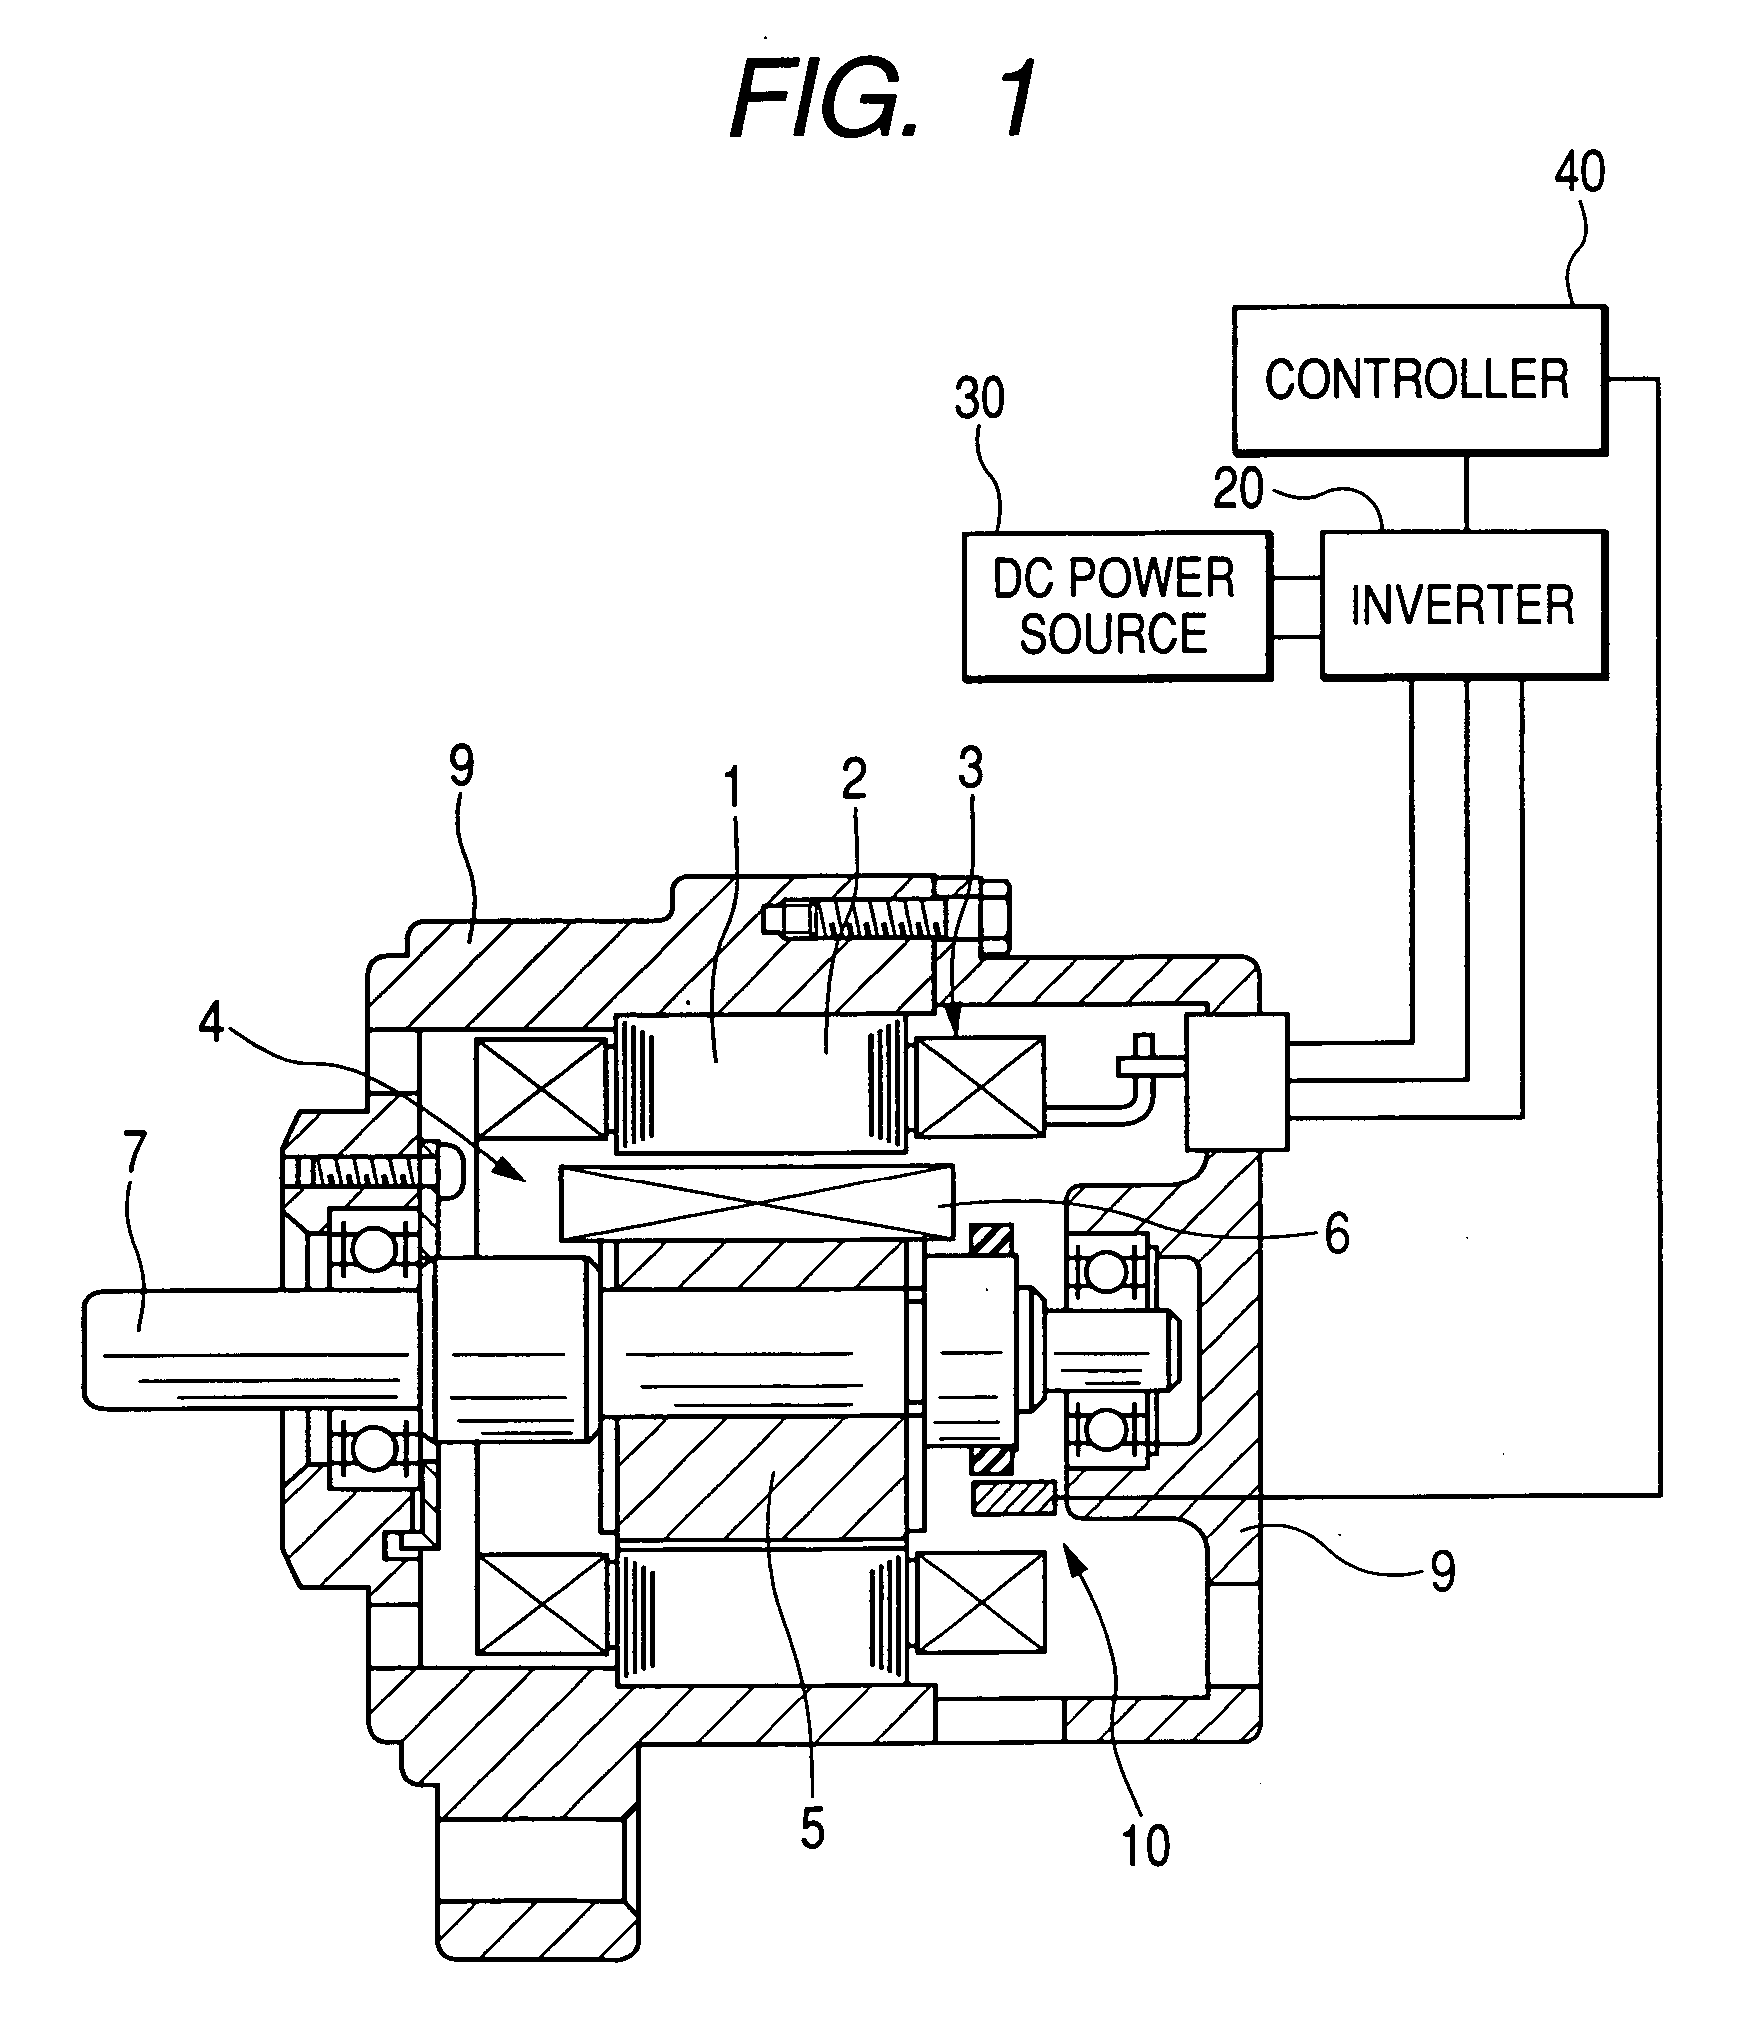 Field-winding type of synchronous machine